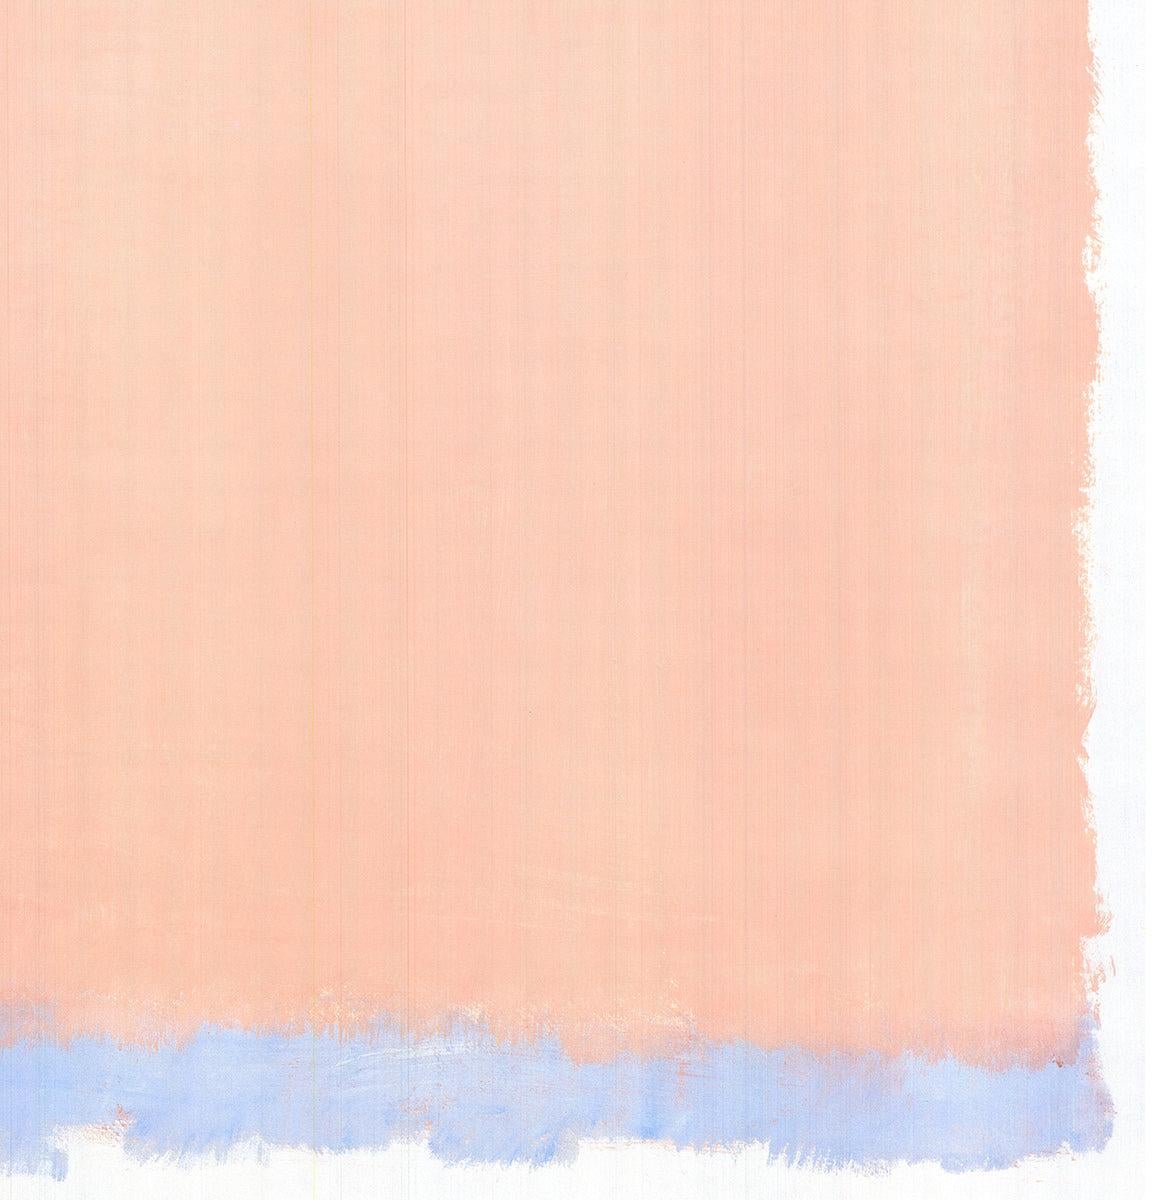 Mark Rothko « Untitled, 1969 » 1998- Lithographie offset en vente 3